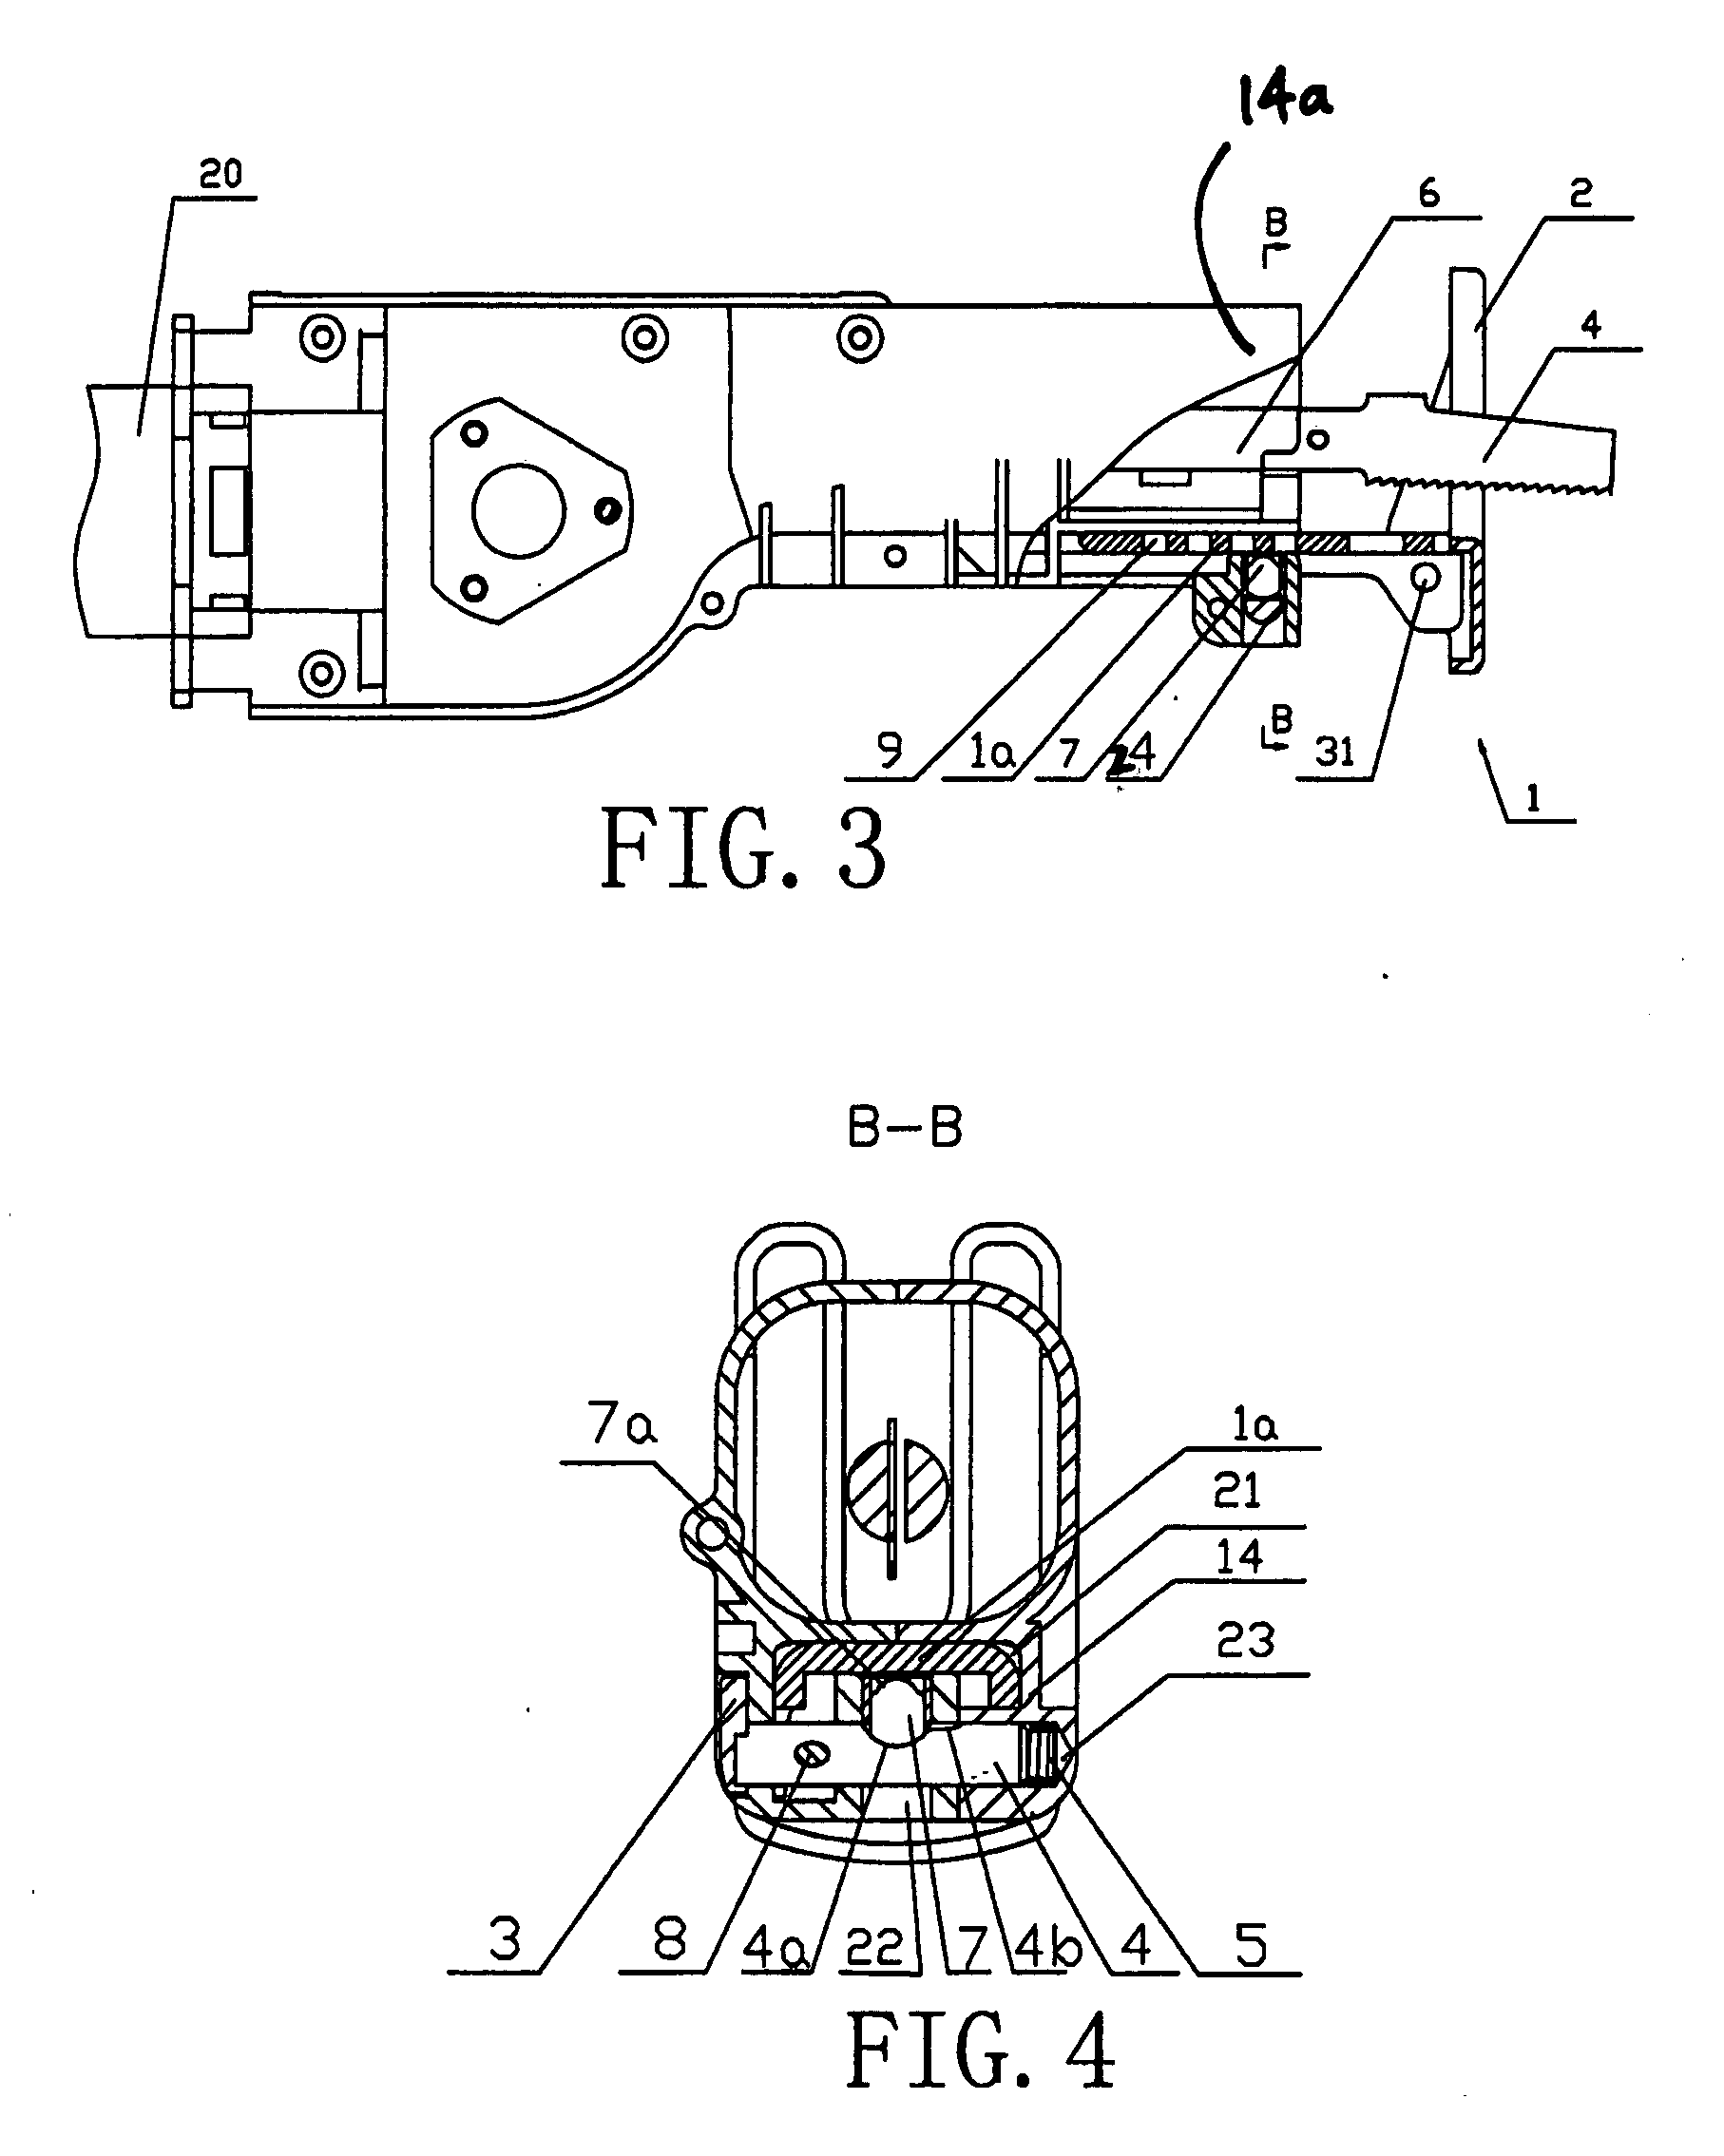 Support shoe for a reciprocating saw